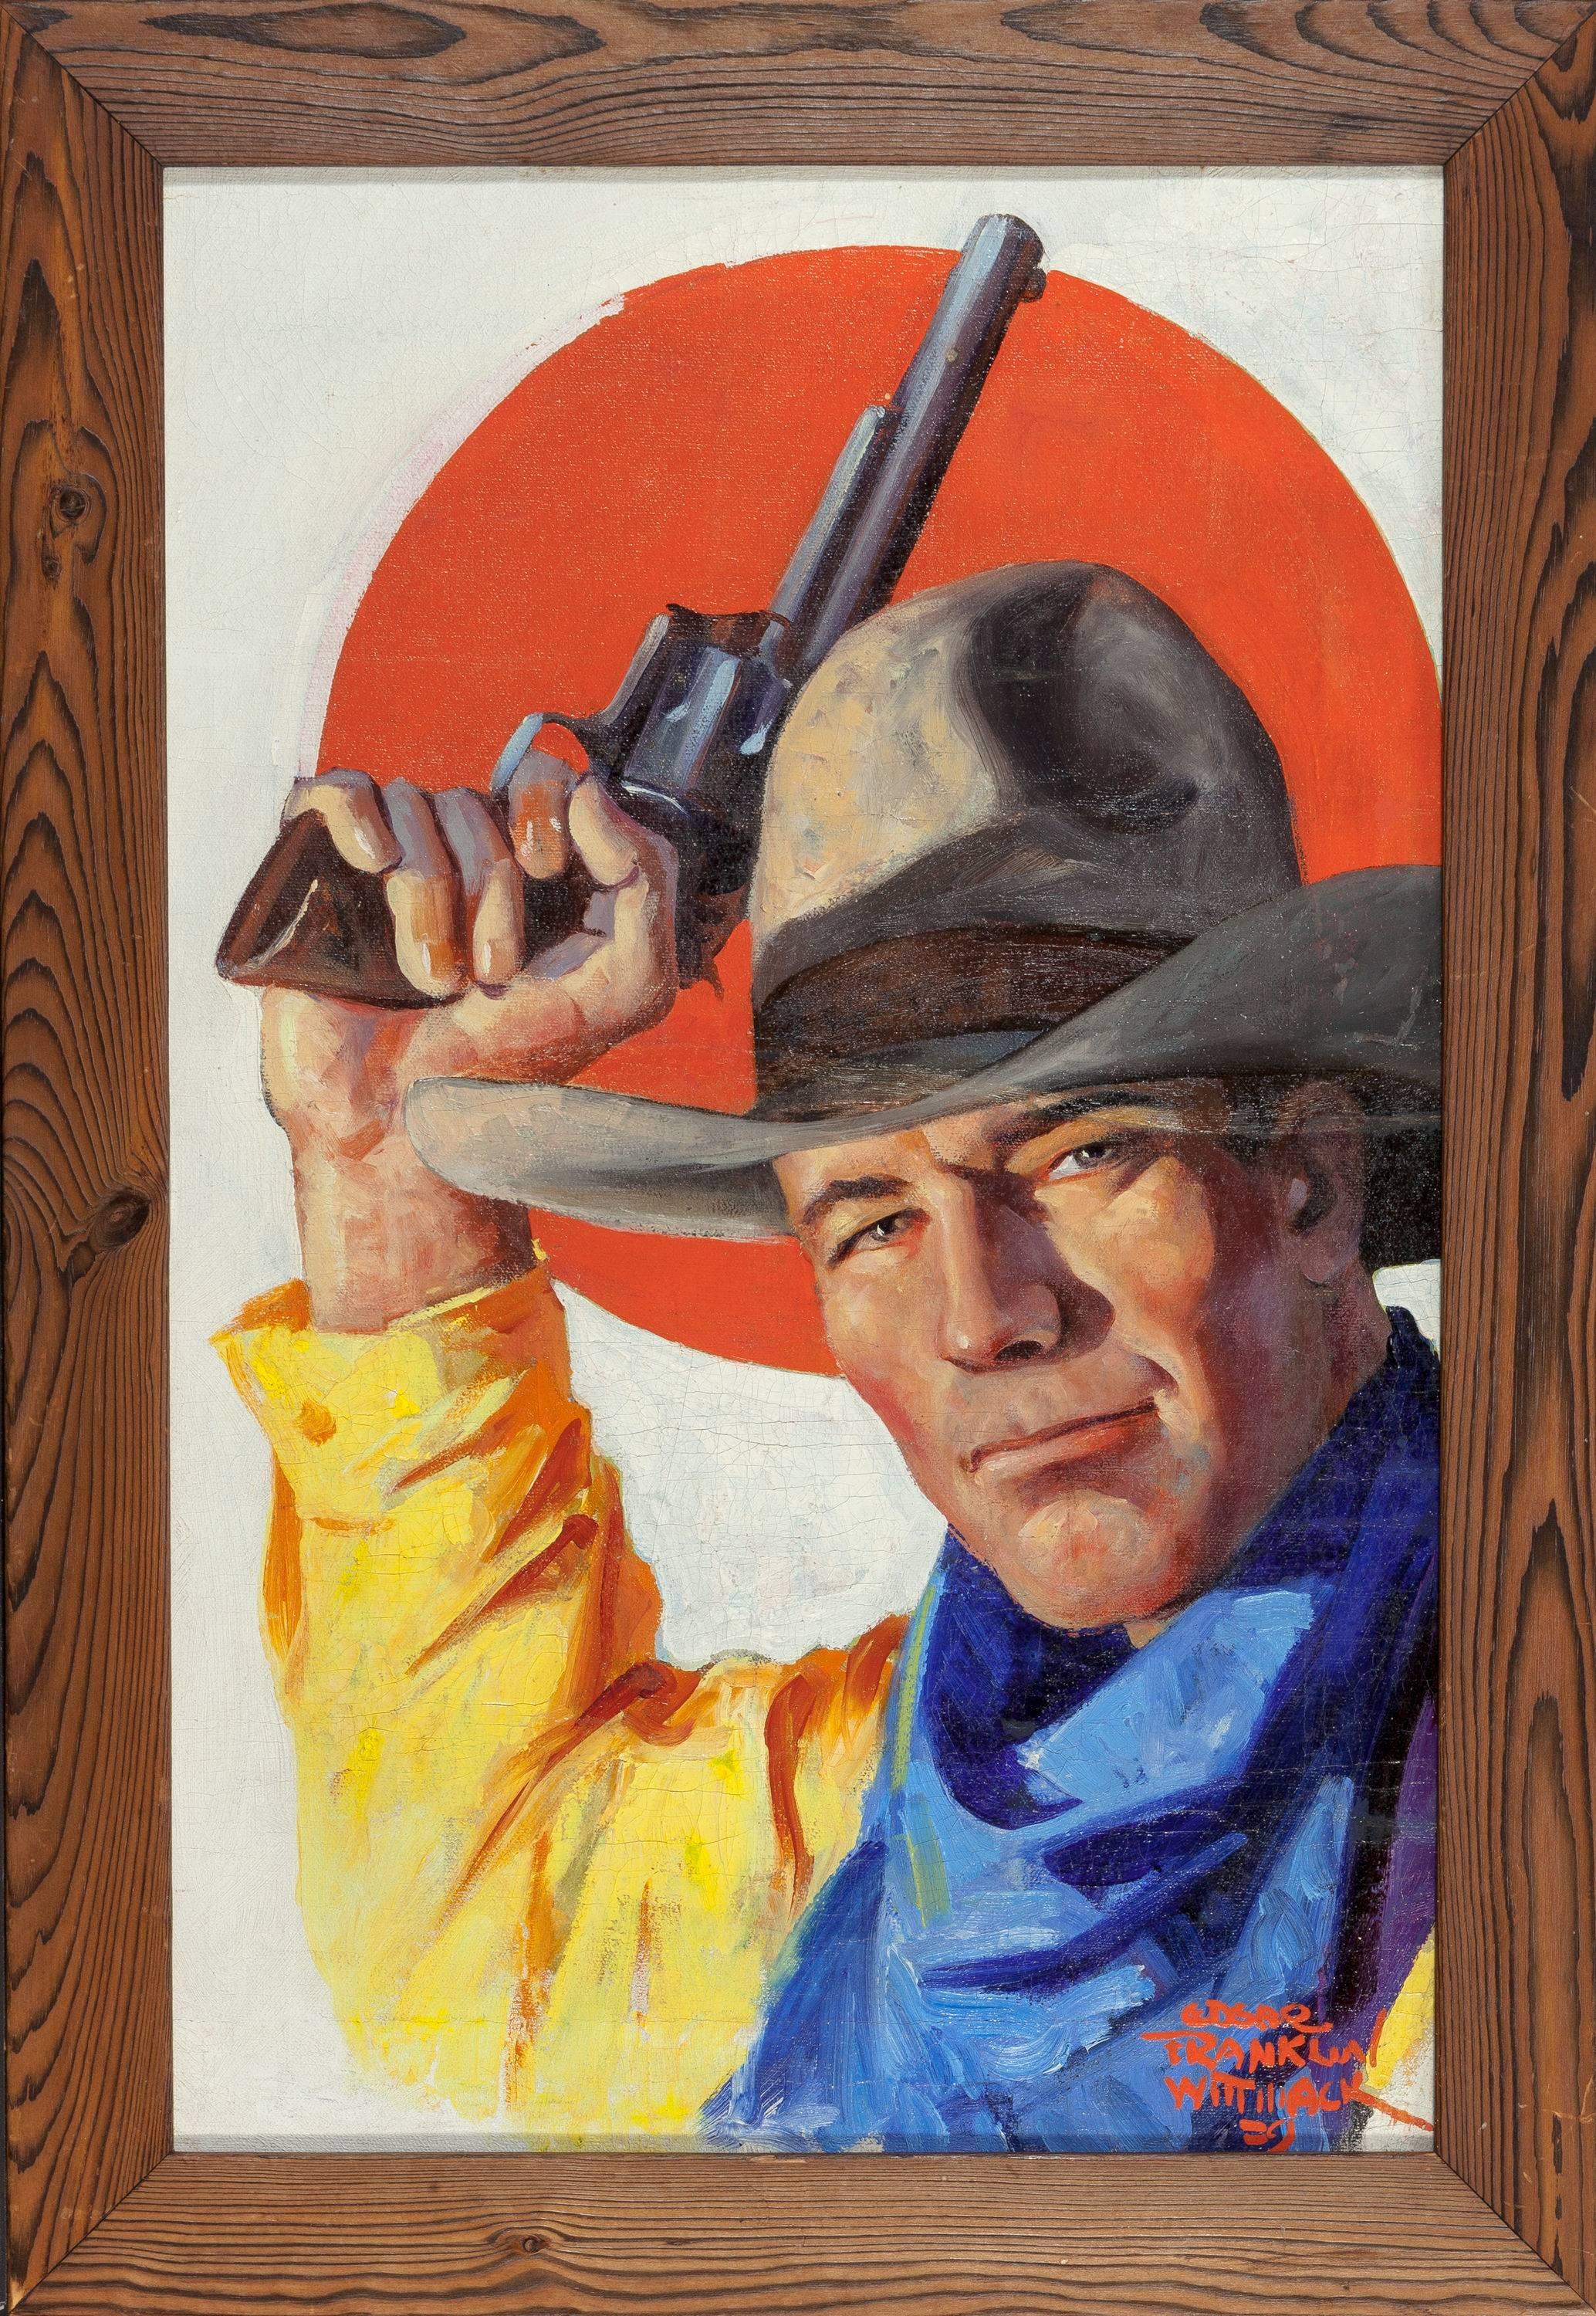 western pulp covers